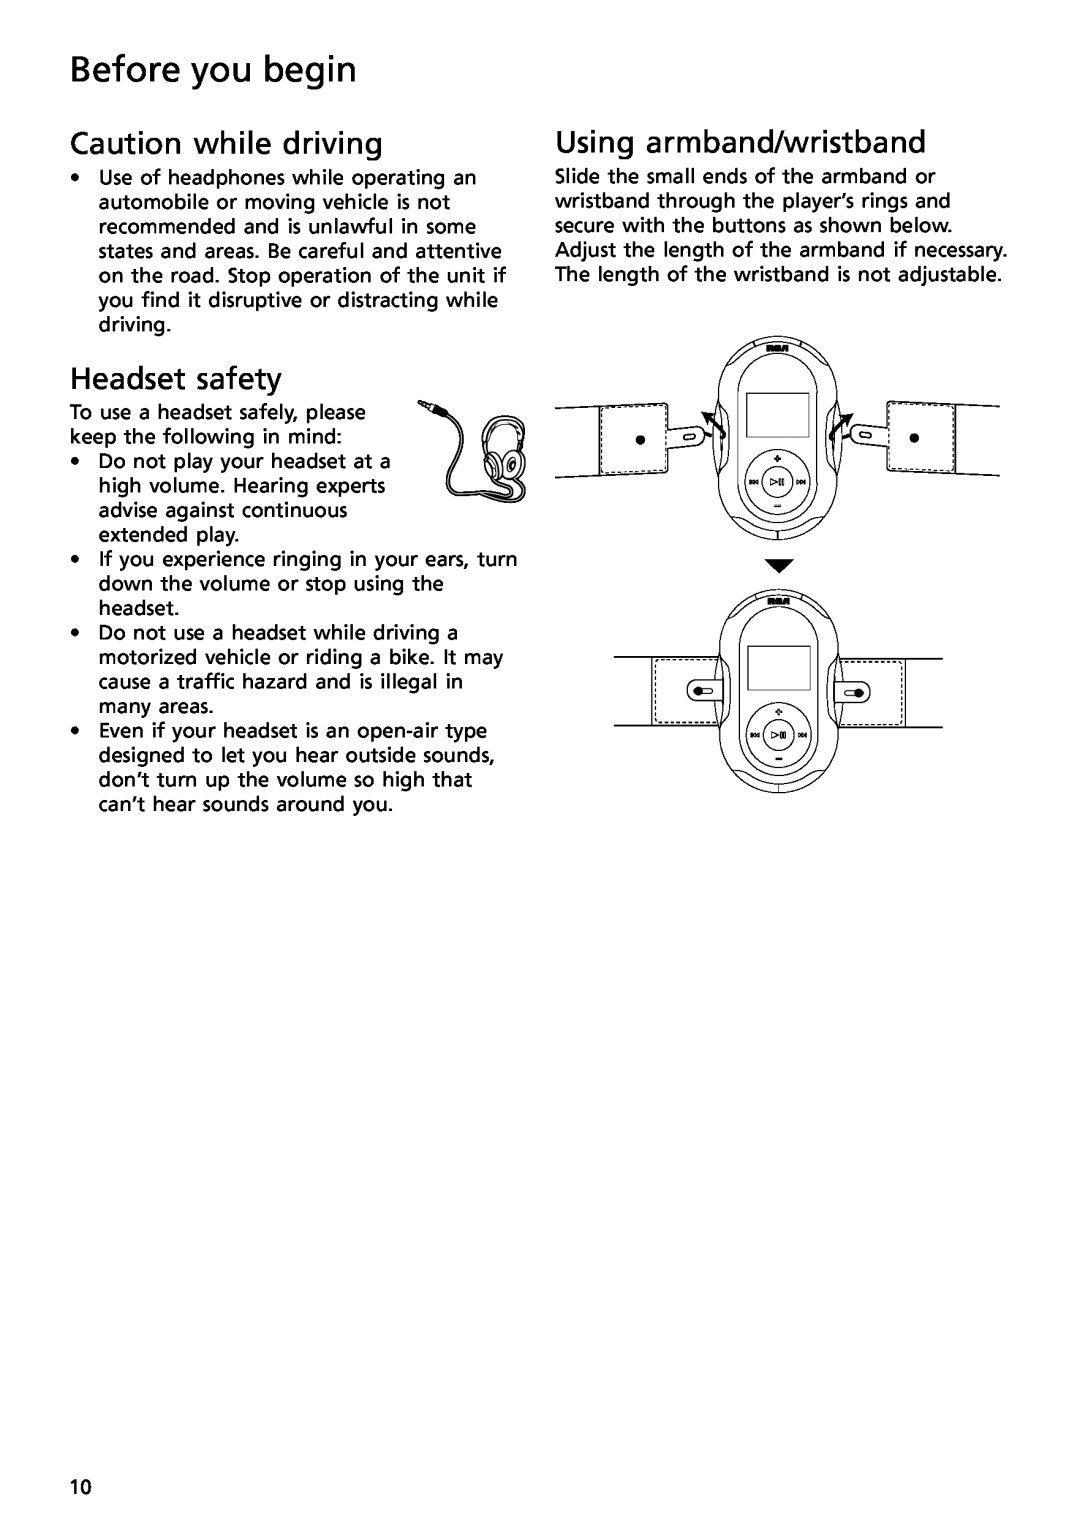 RCA S2502, S2501 user manual Caution while driving, Headset safety, Using armband/wristband, Before you begin 